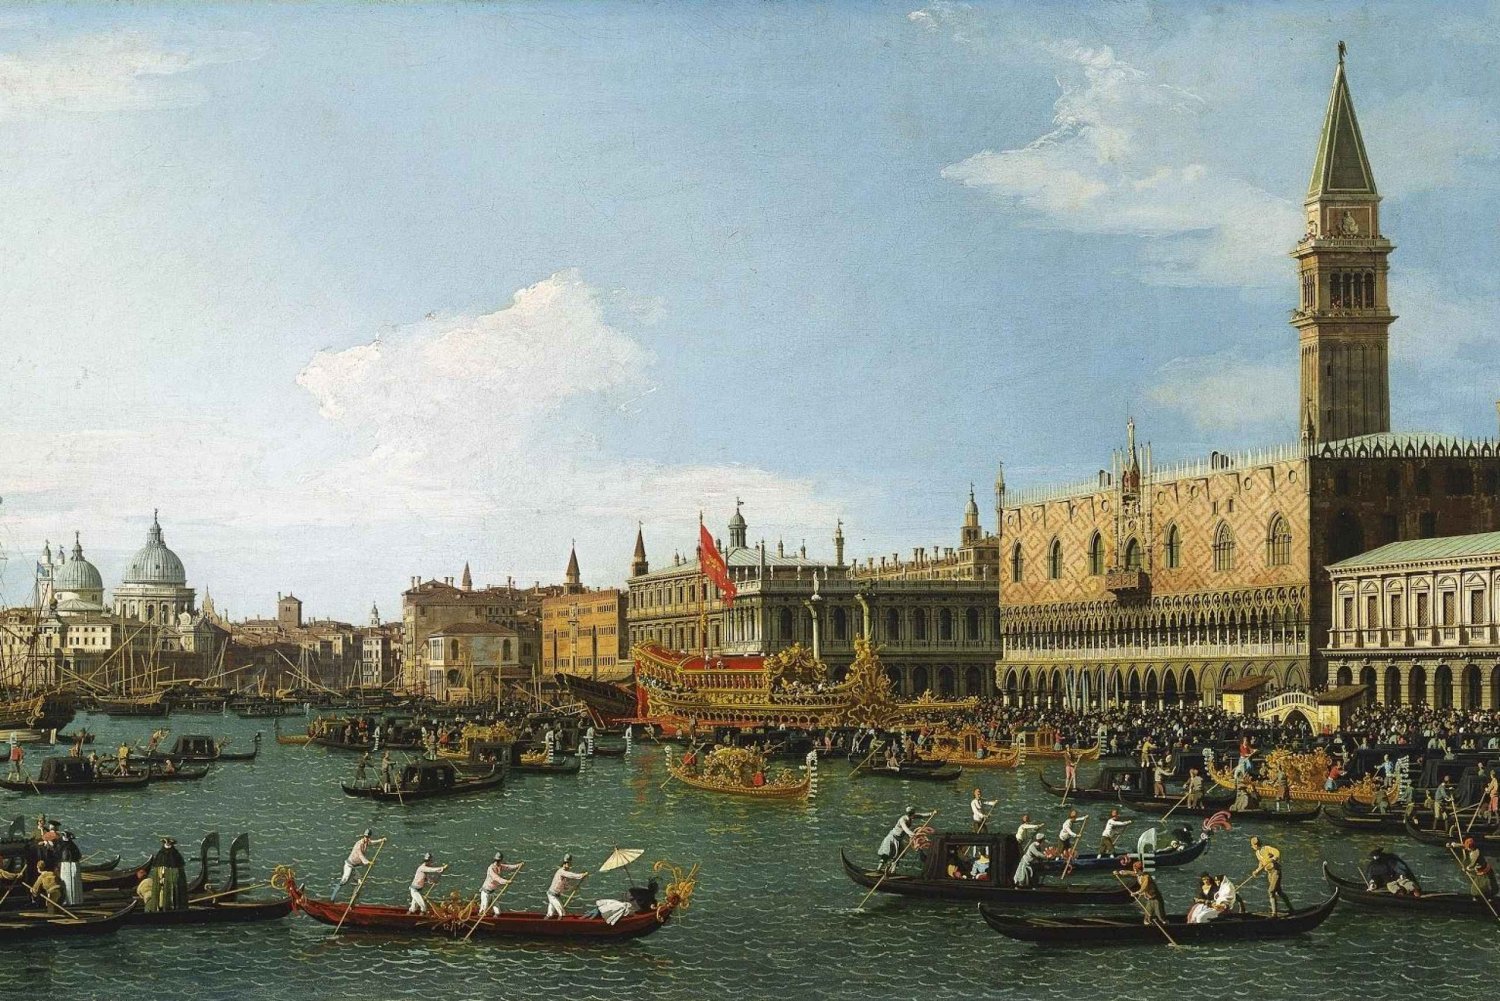 The Venice Wonder: Walking tour of S. Mark’s Square and More